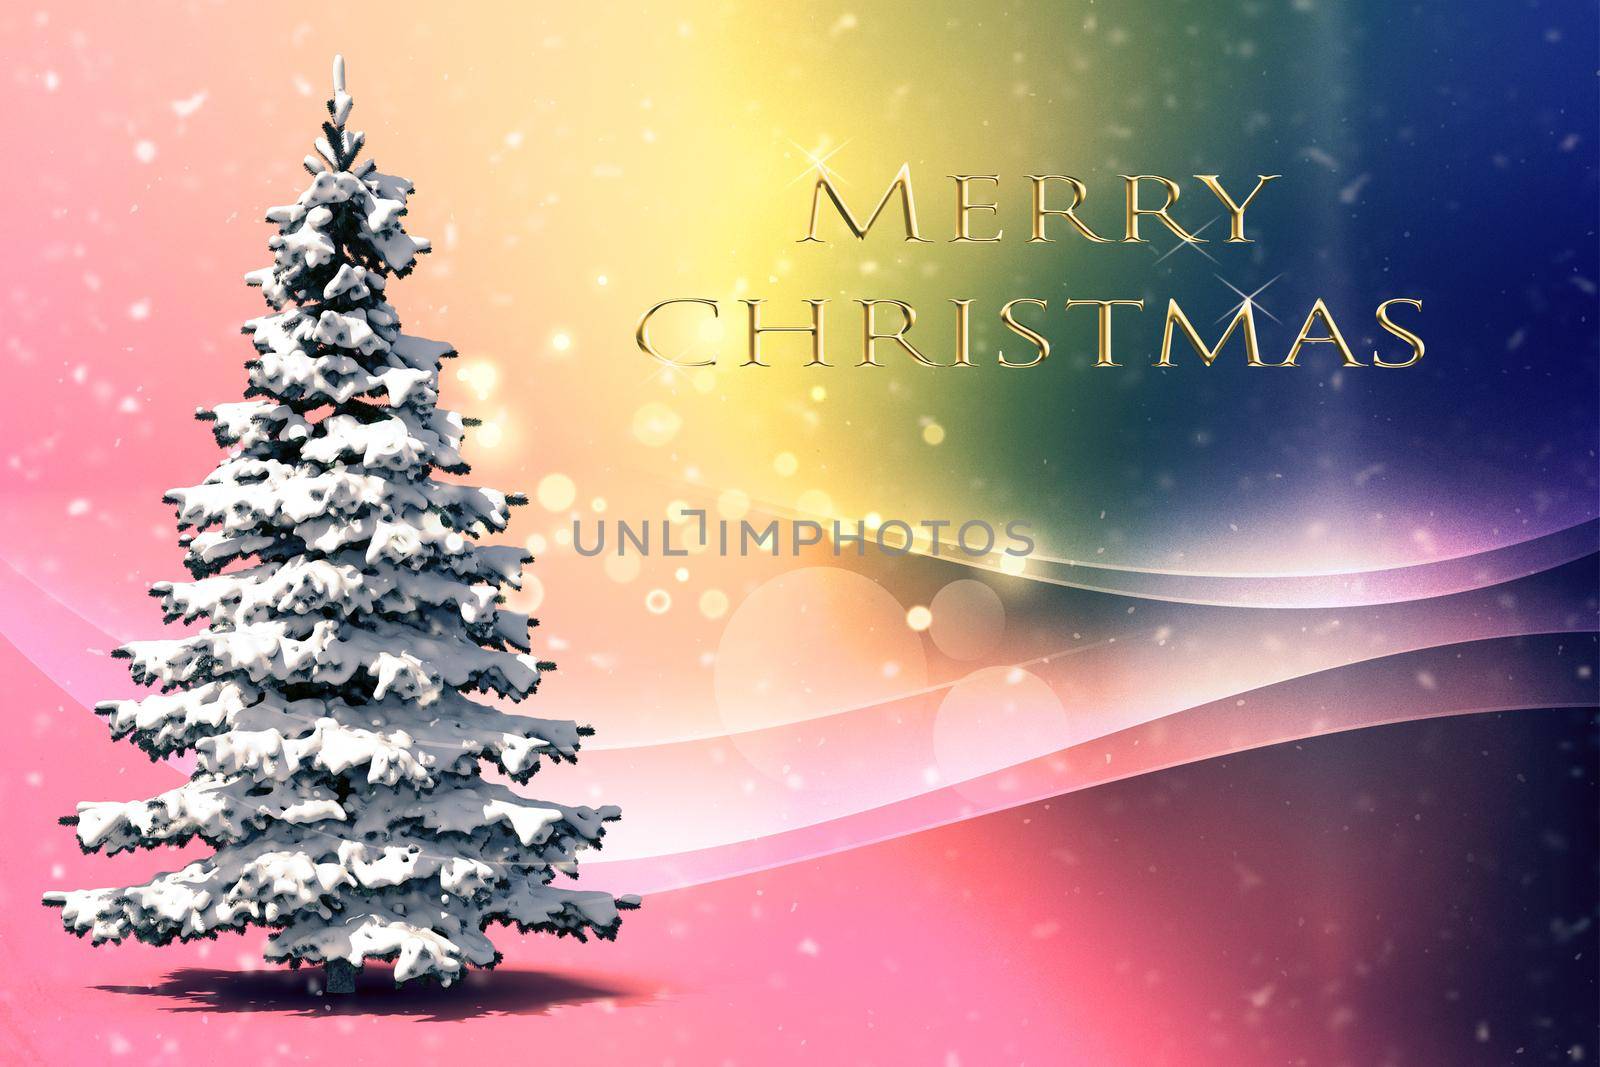 Christmas card with a picture of a Christmas tree by georgina198